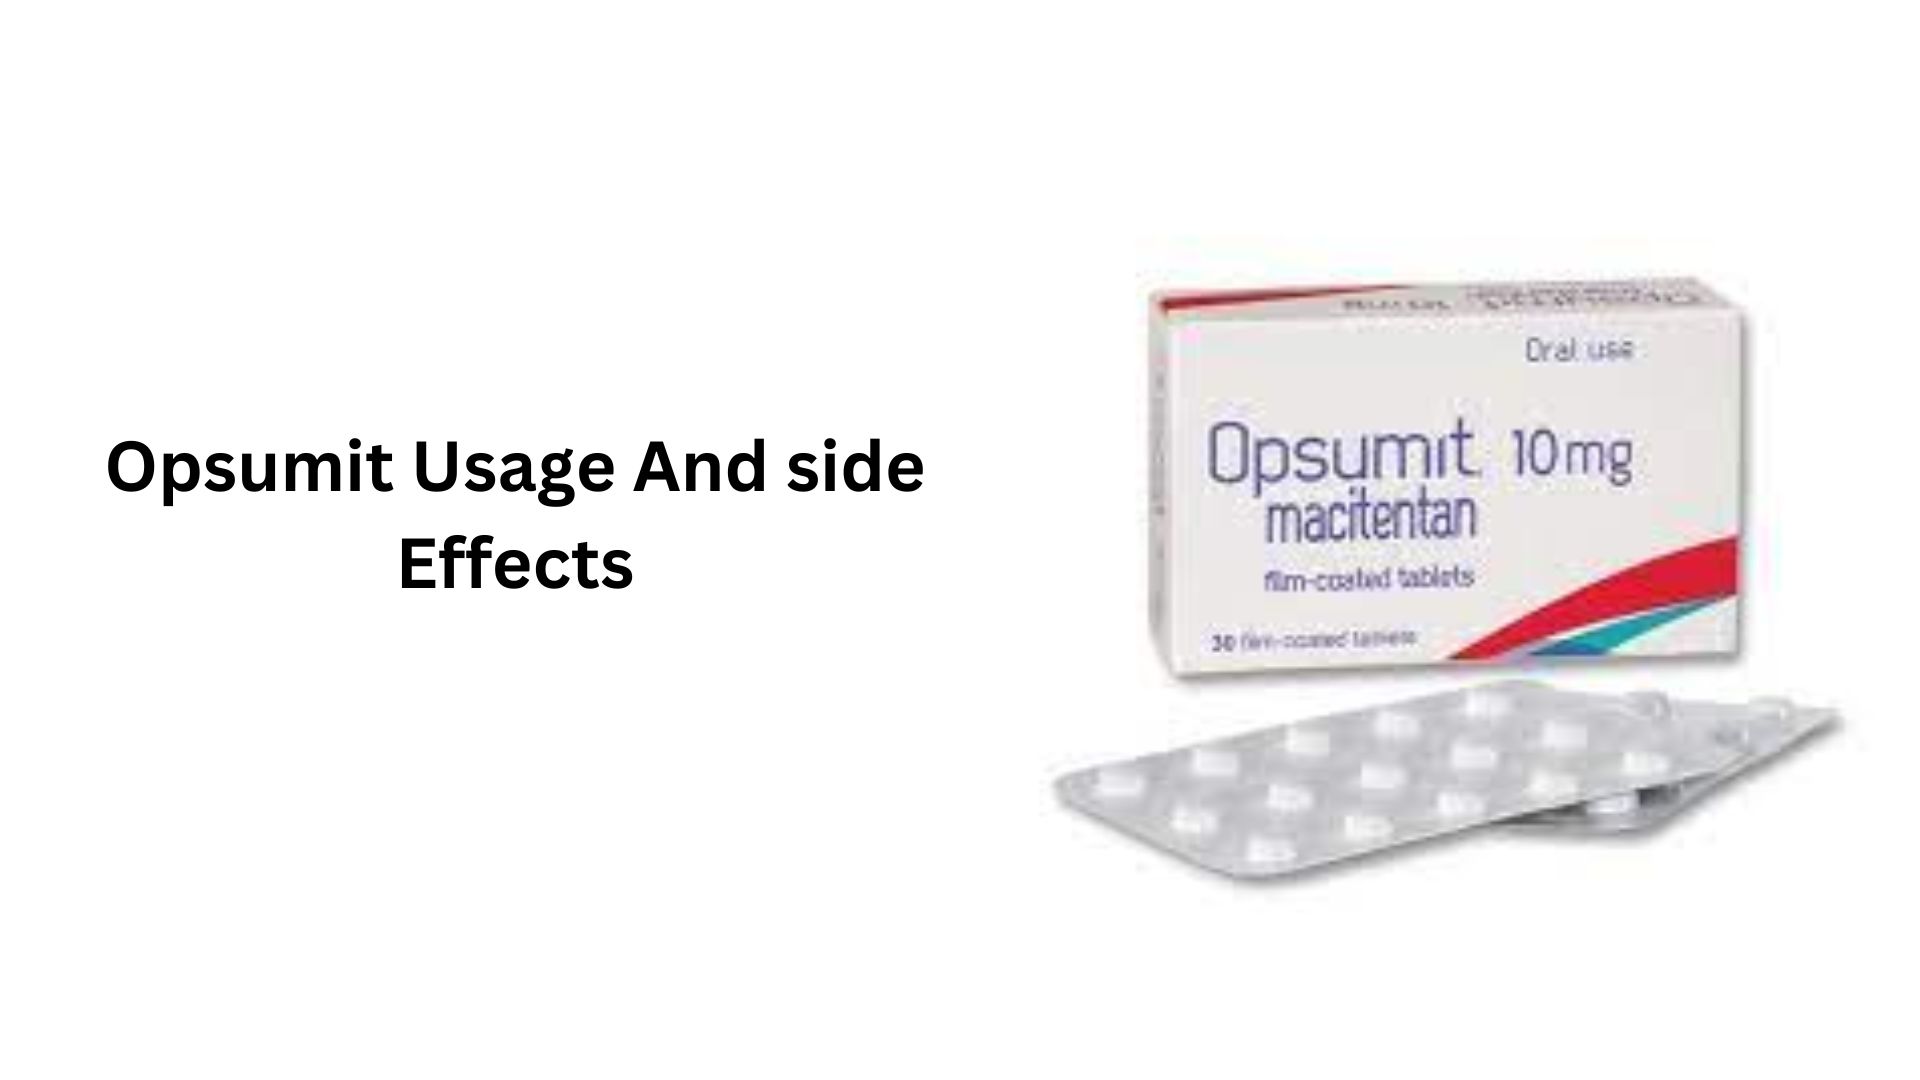 Opsumit Usage And side Effects